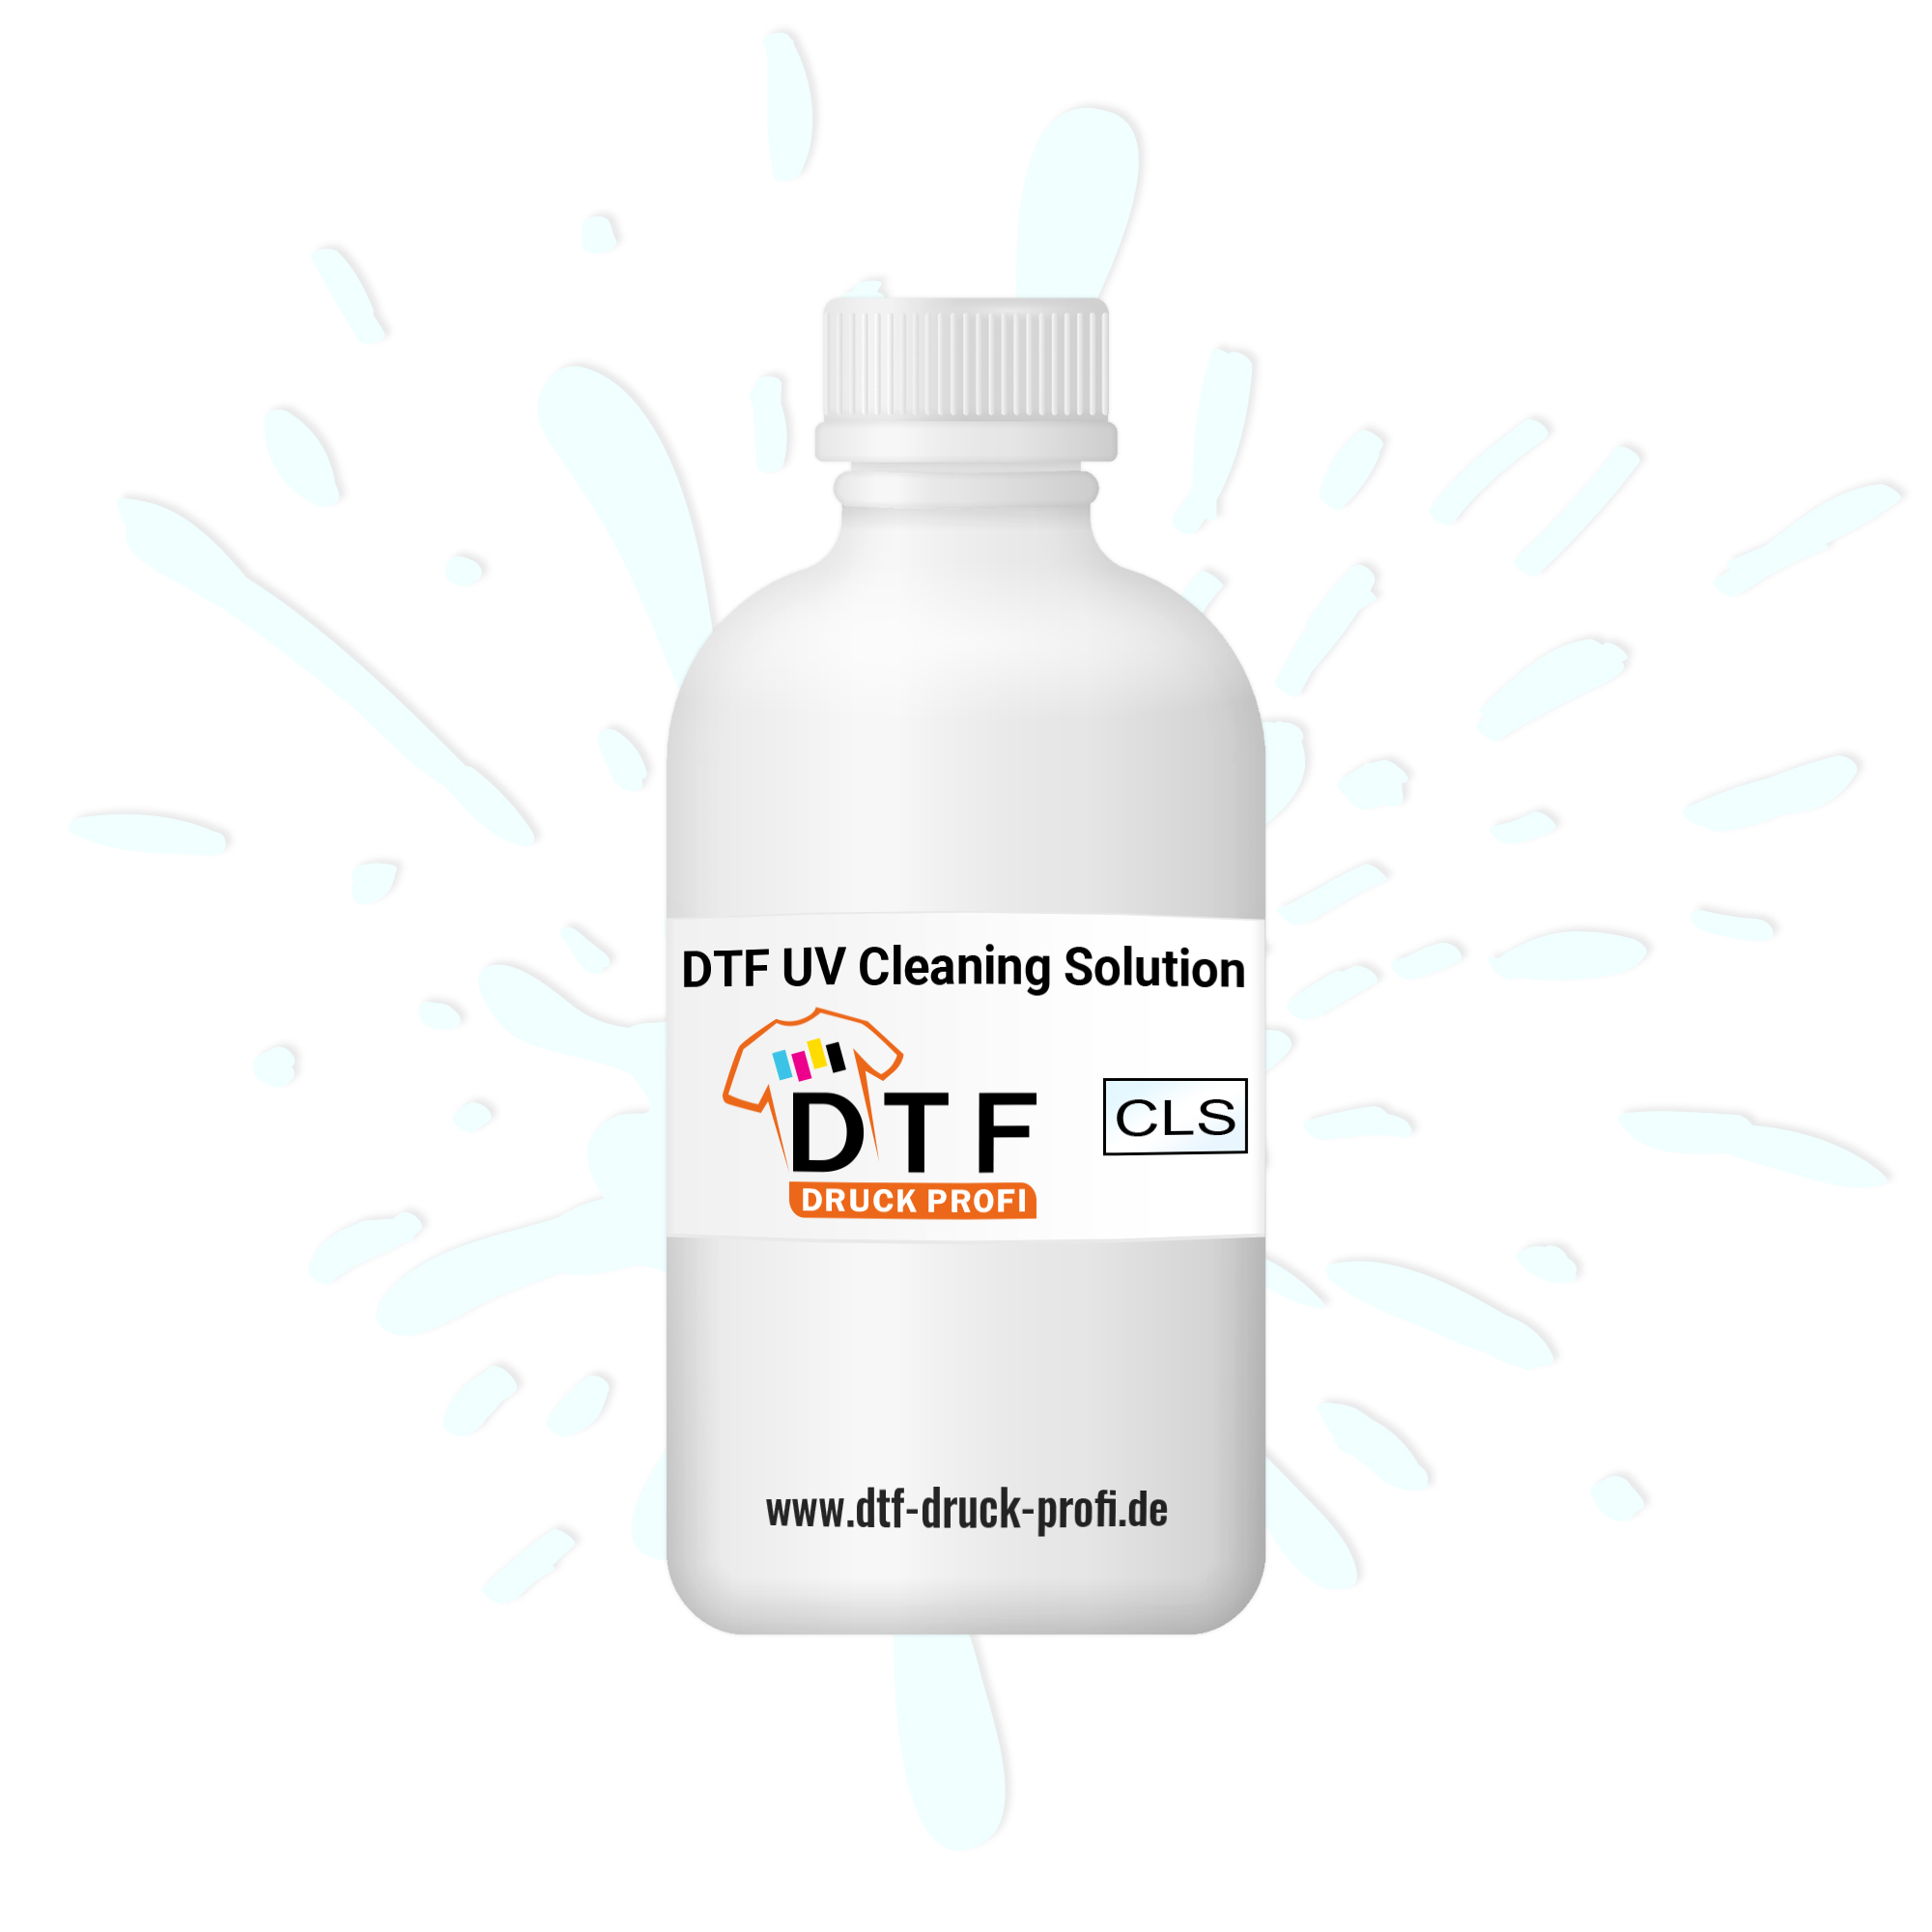 DTF-Druck UV Cleaning Solution